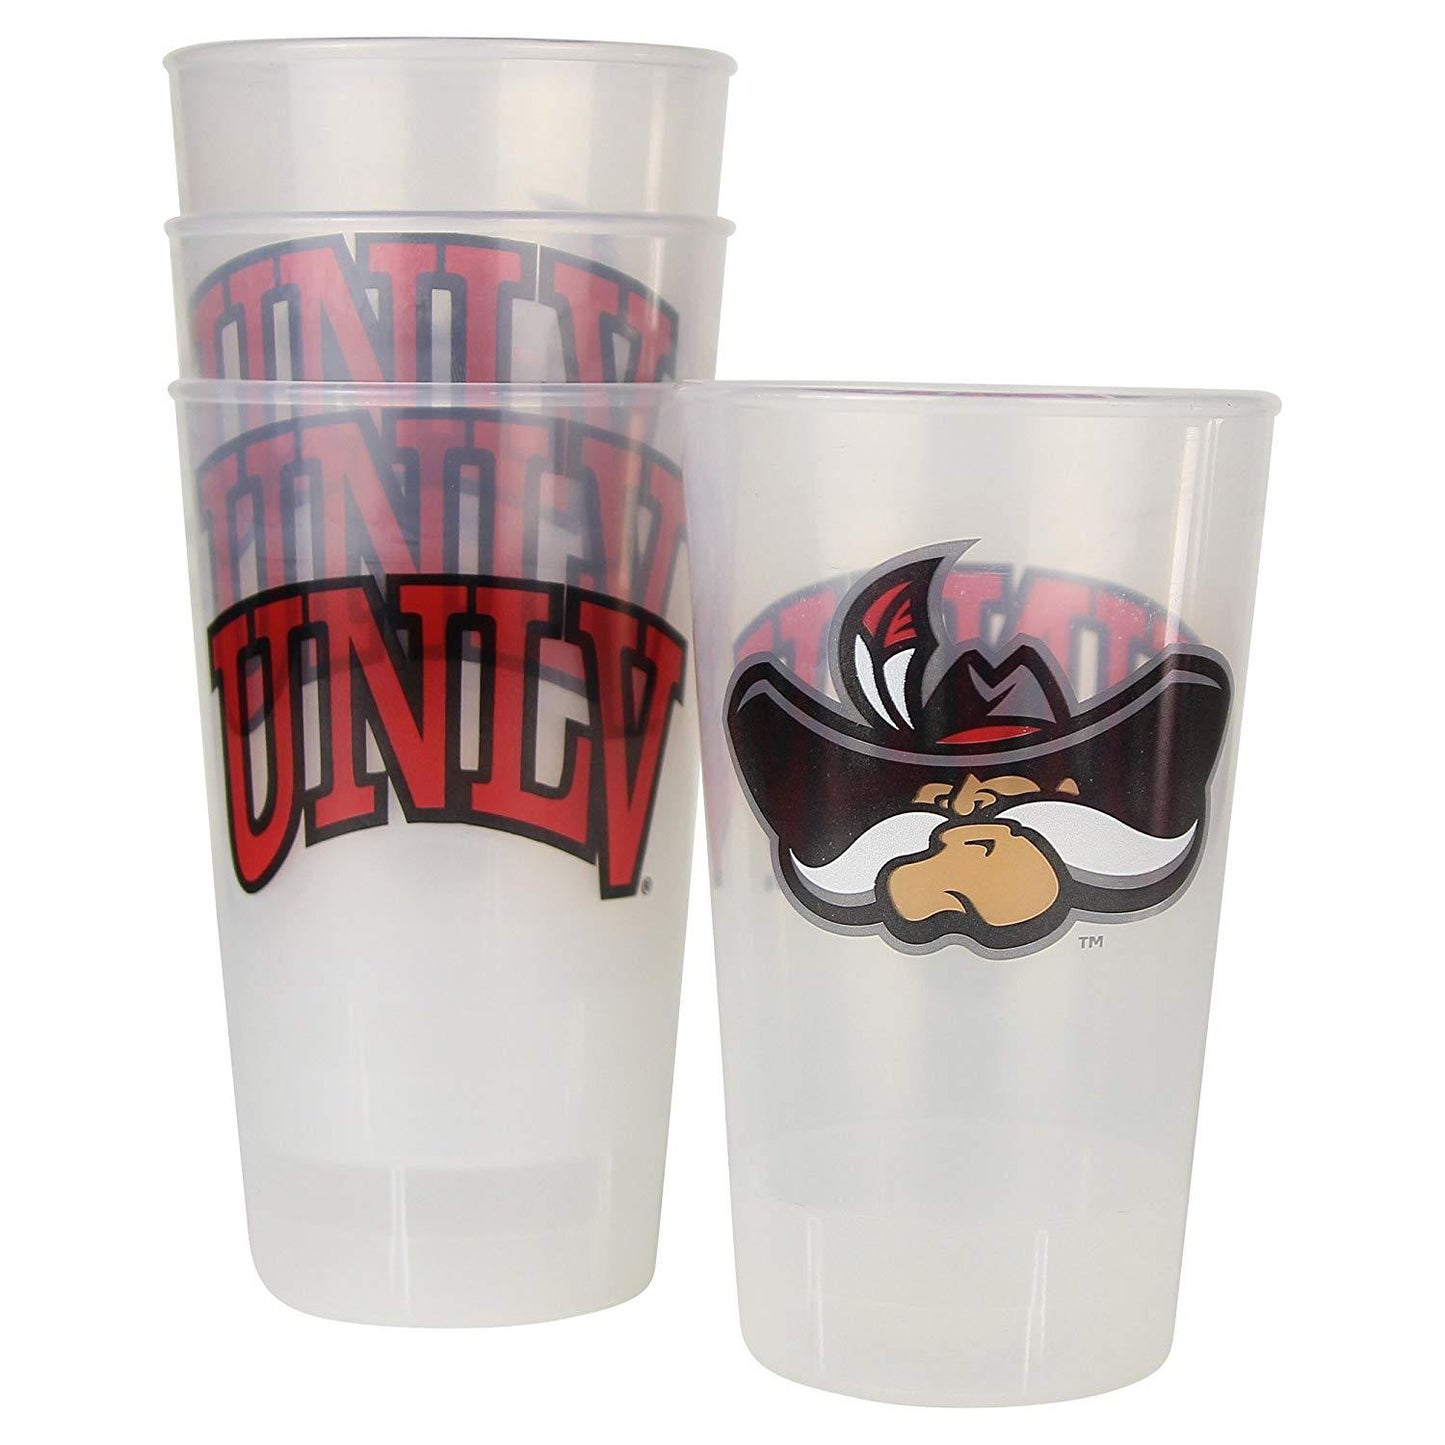 UNLV Rebels Frosted Plastic Tailgating Cups, 16oz.(4-Pack)